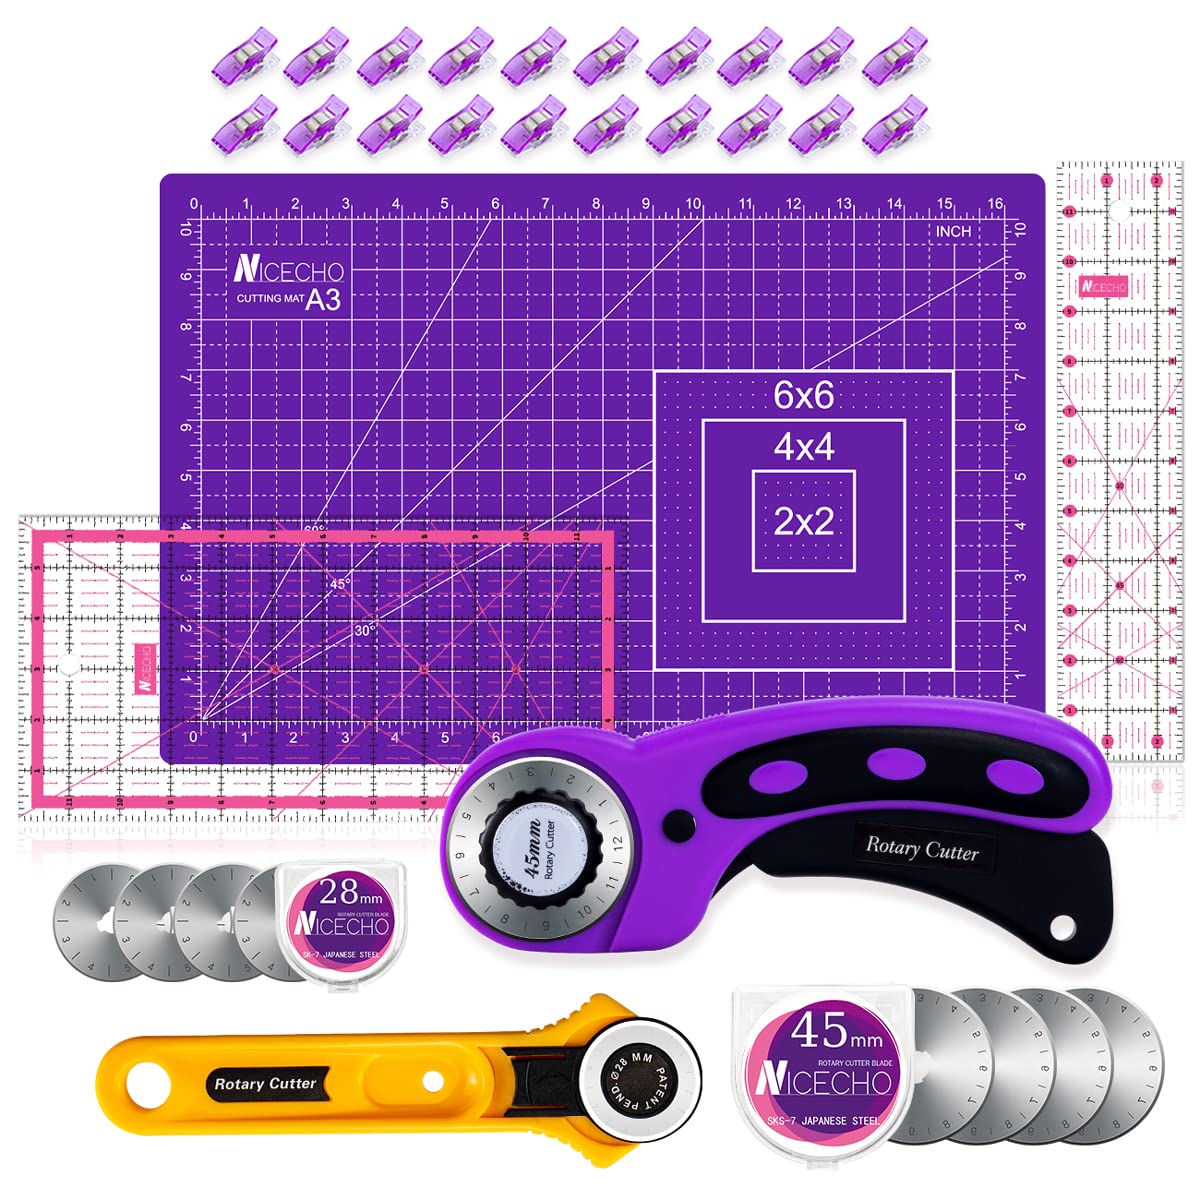 Rotary Cutter Set,Nicecho Sewing Quilting Supplies,45mm & 28 mm Fabric Cutters,8 Rotary Cutter Blades,A3 Cutting Mat for Sewing,6x12 & 2.5x12 In